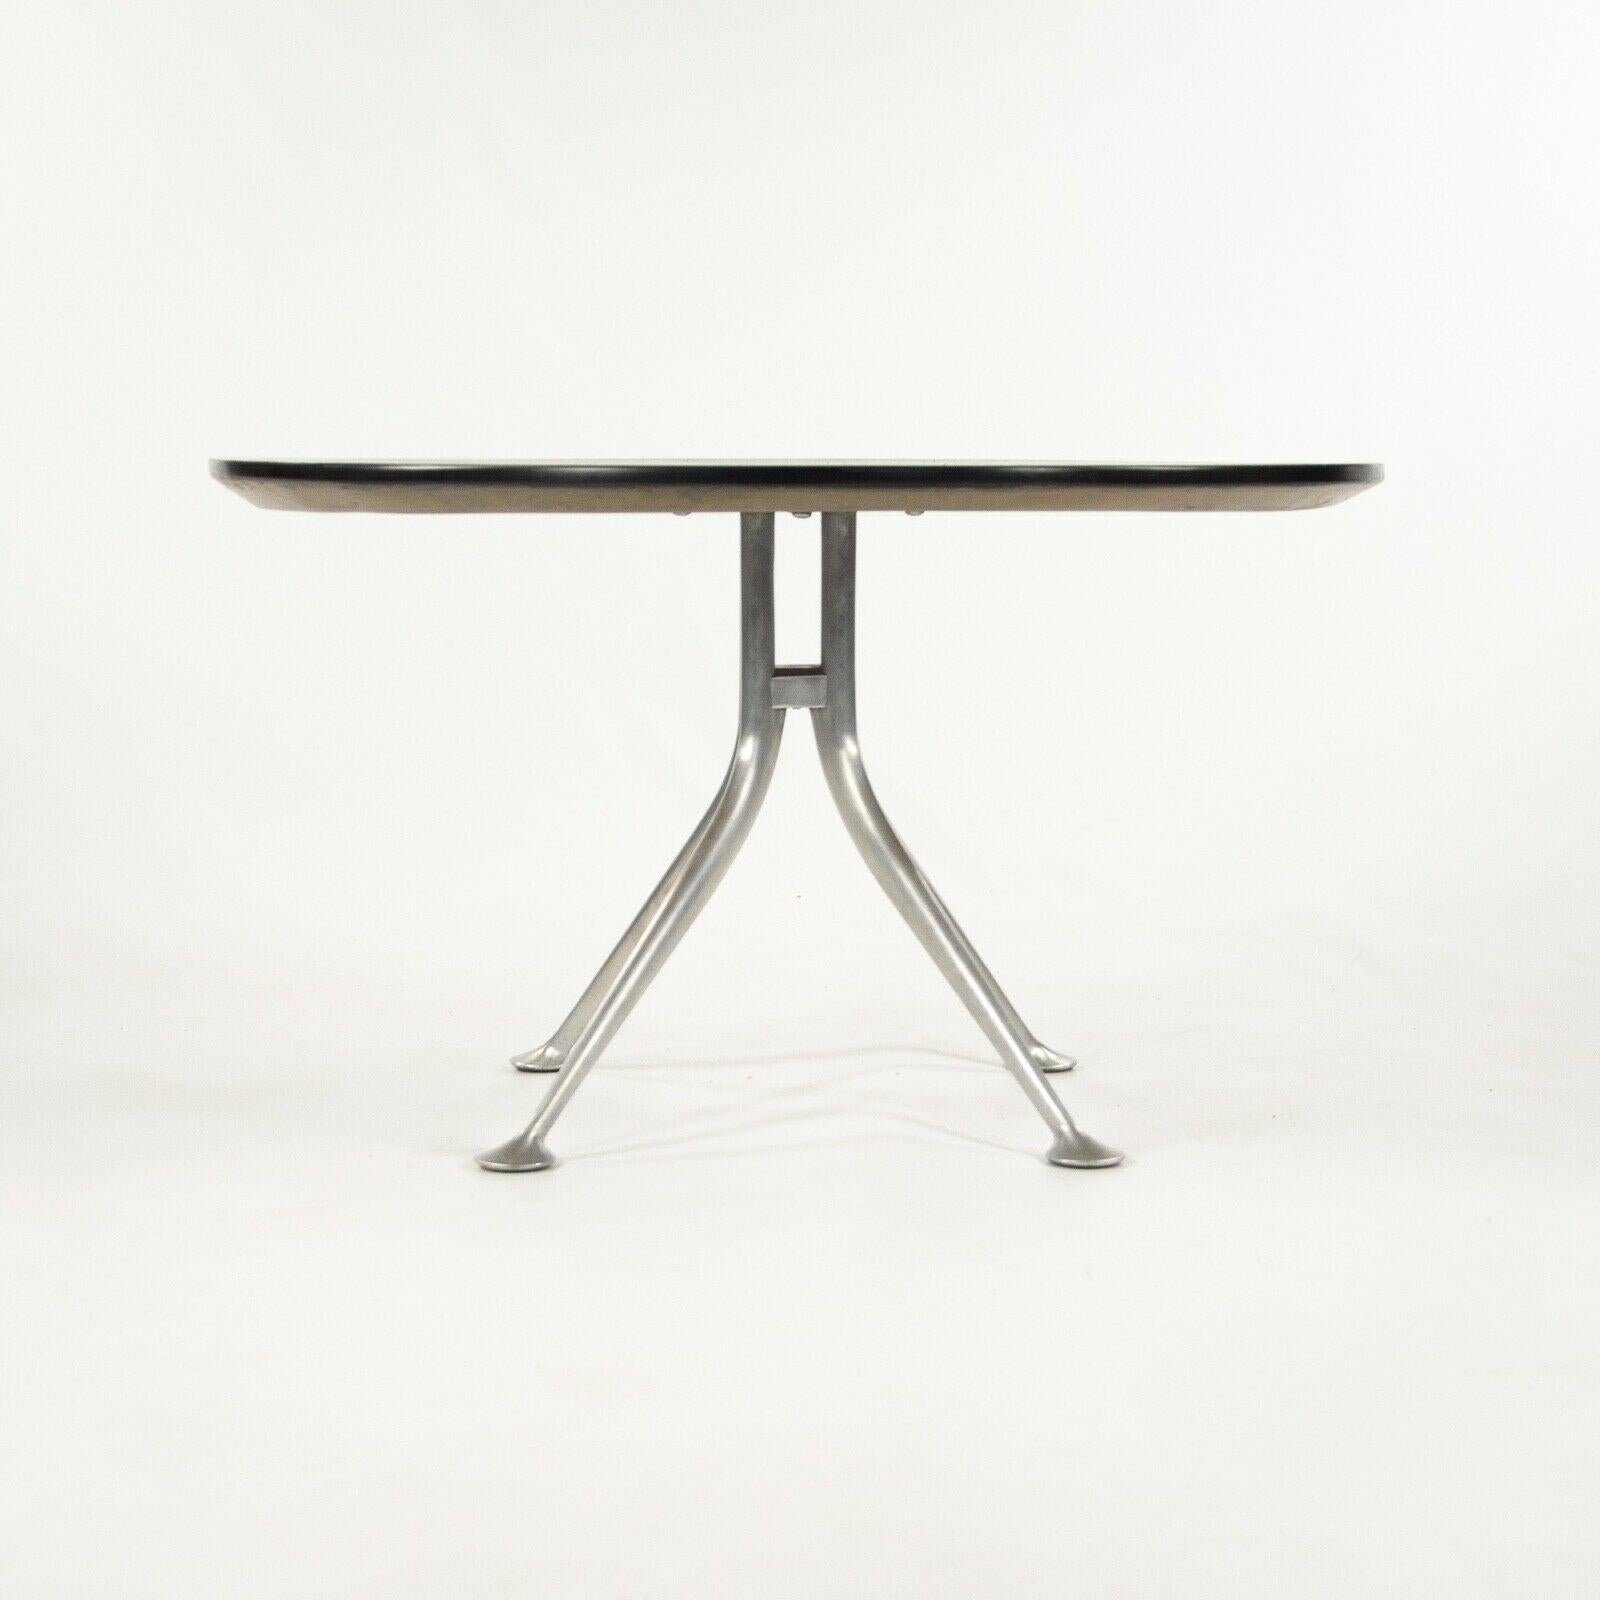 American 1967 Rare Alexander Girard & Charles Eames Coffee Table with Black Laminate Top For Sale